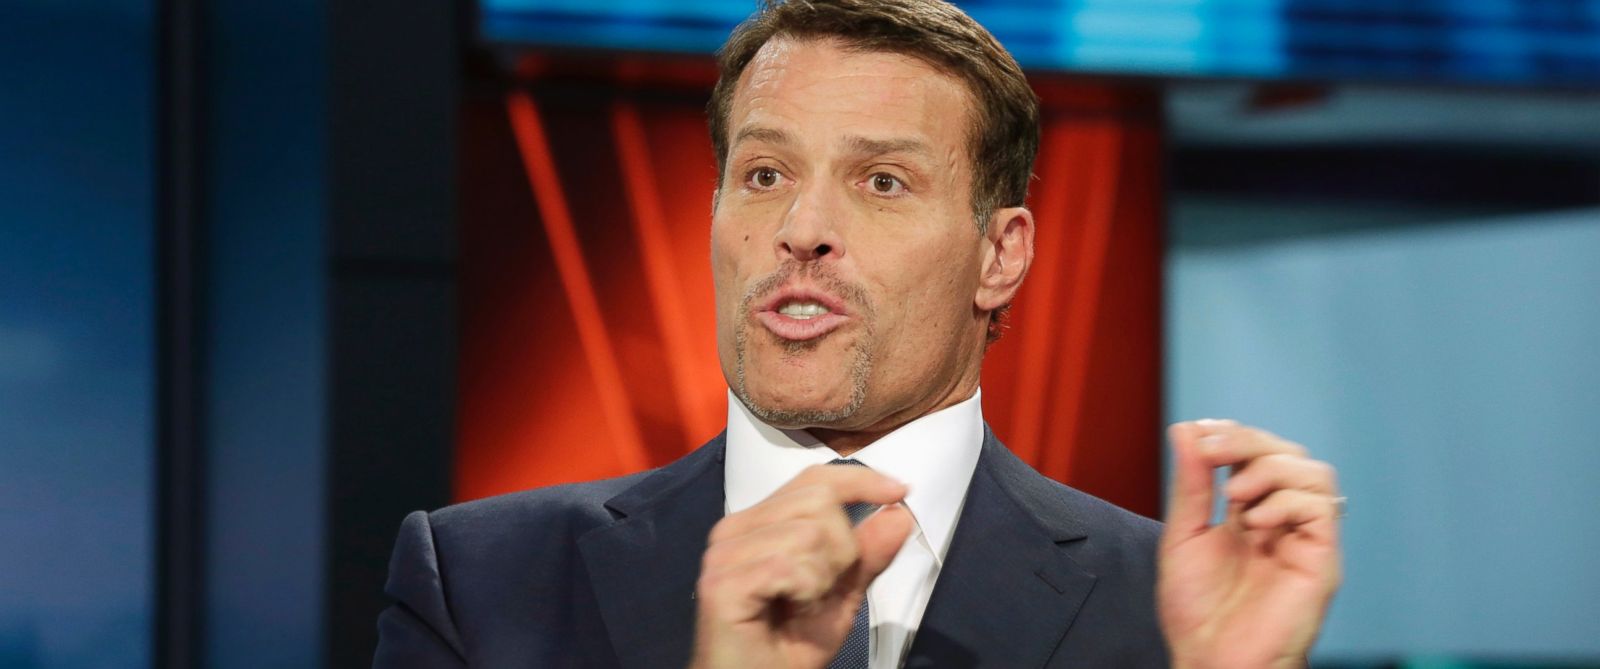 Dozens Injured After Walking on Hot Coals at Tony Robbins Event